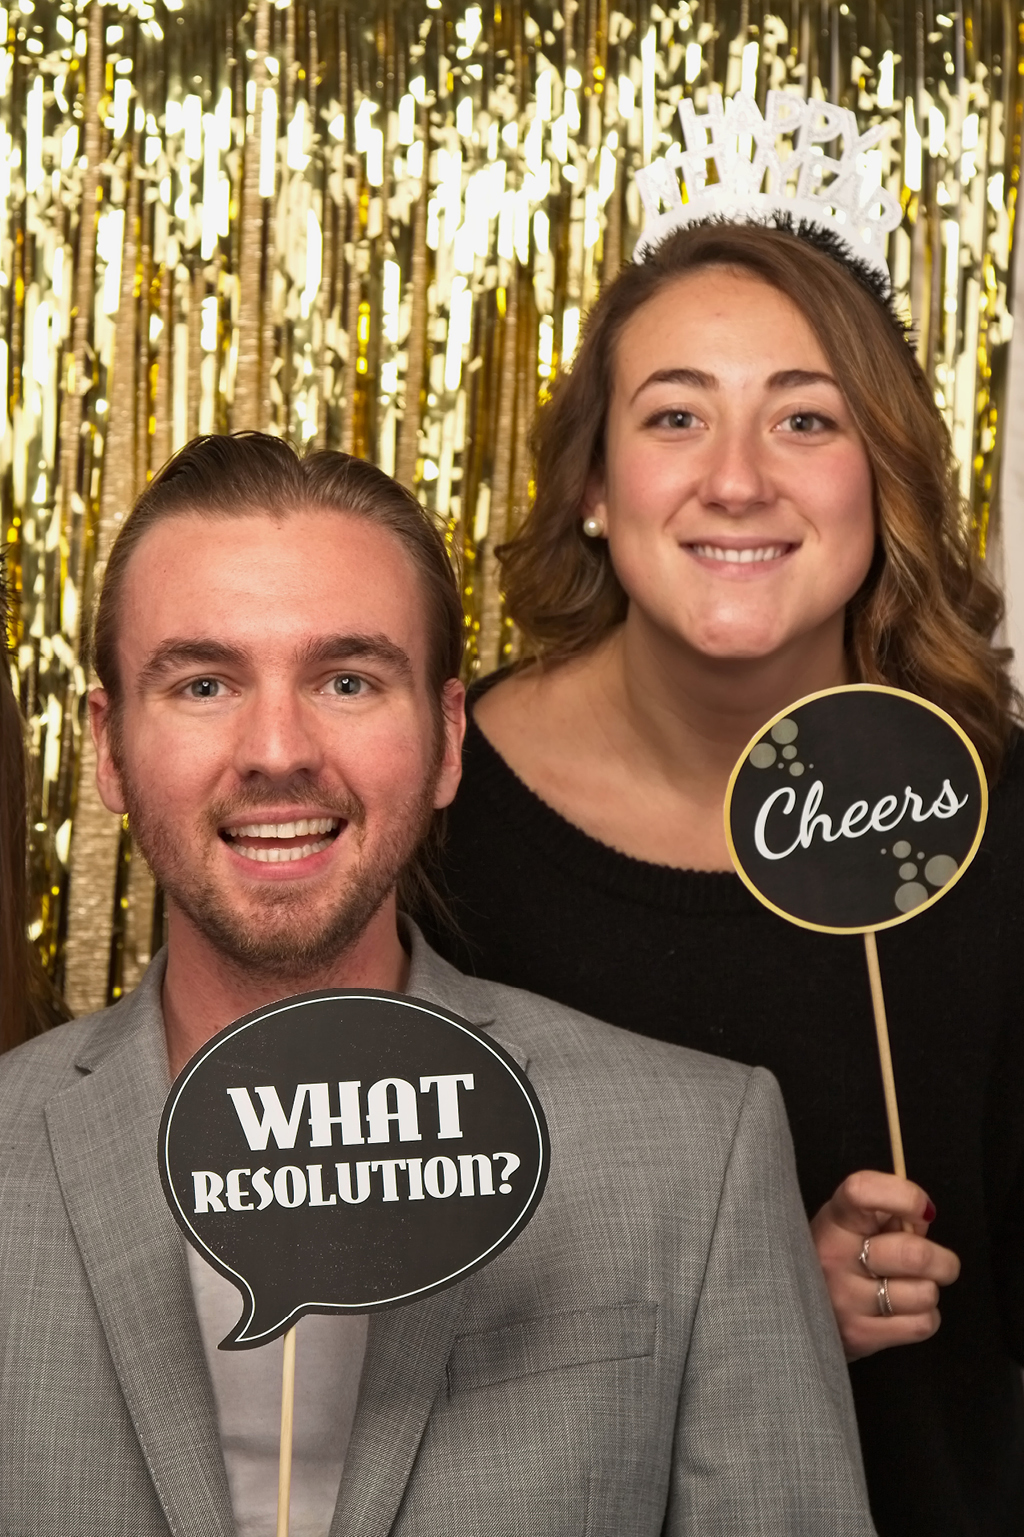 nye-photo-booth-props